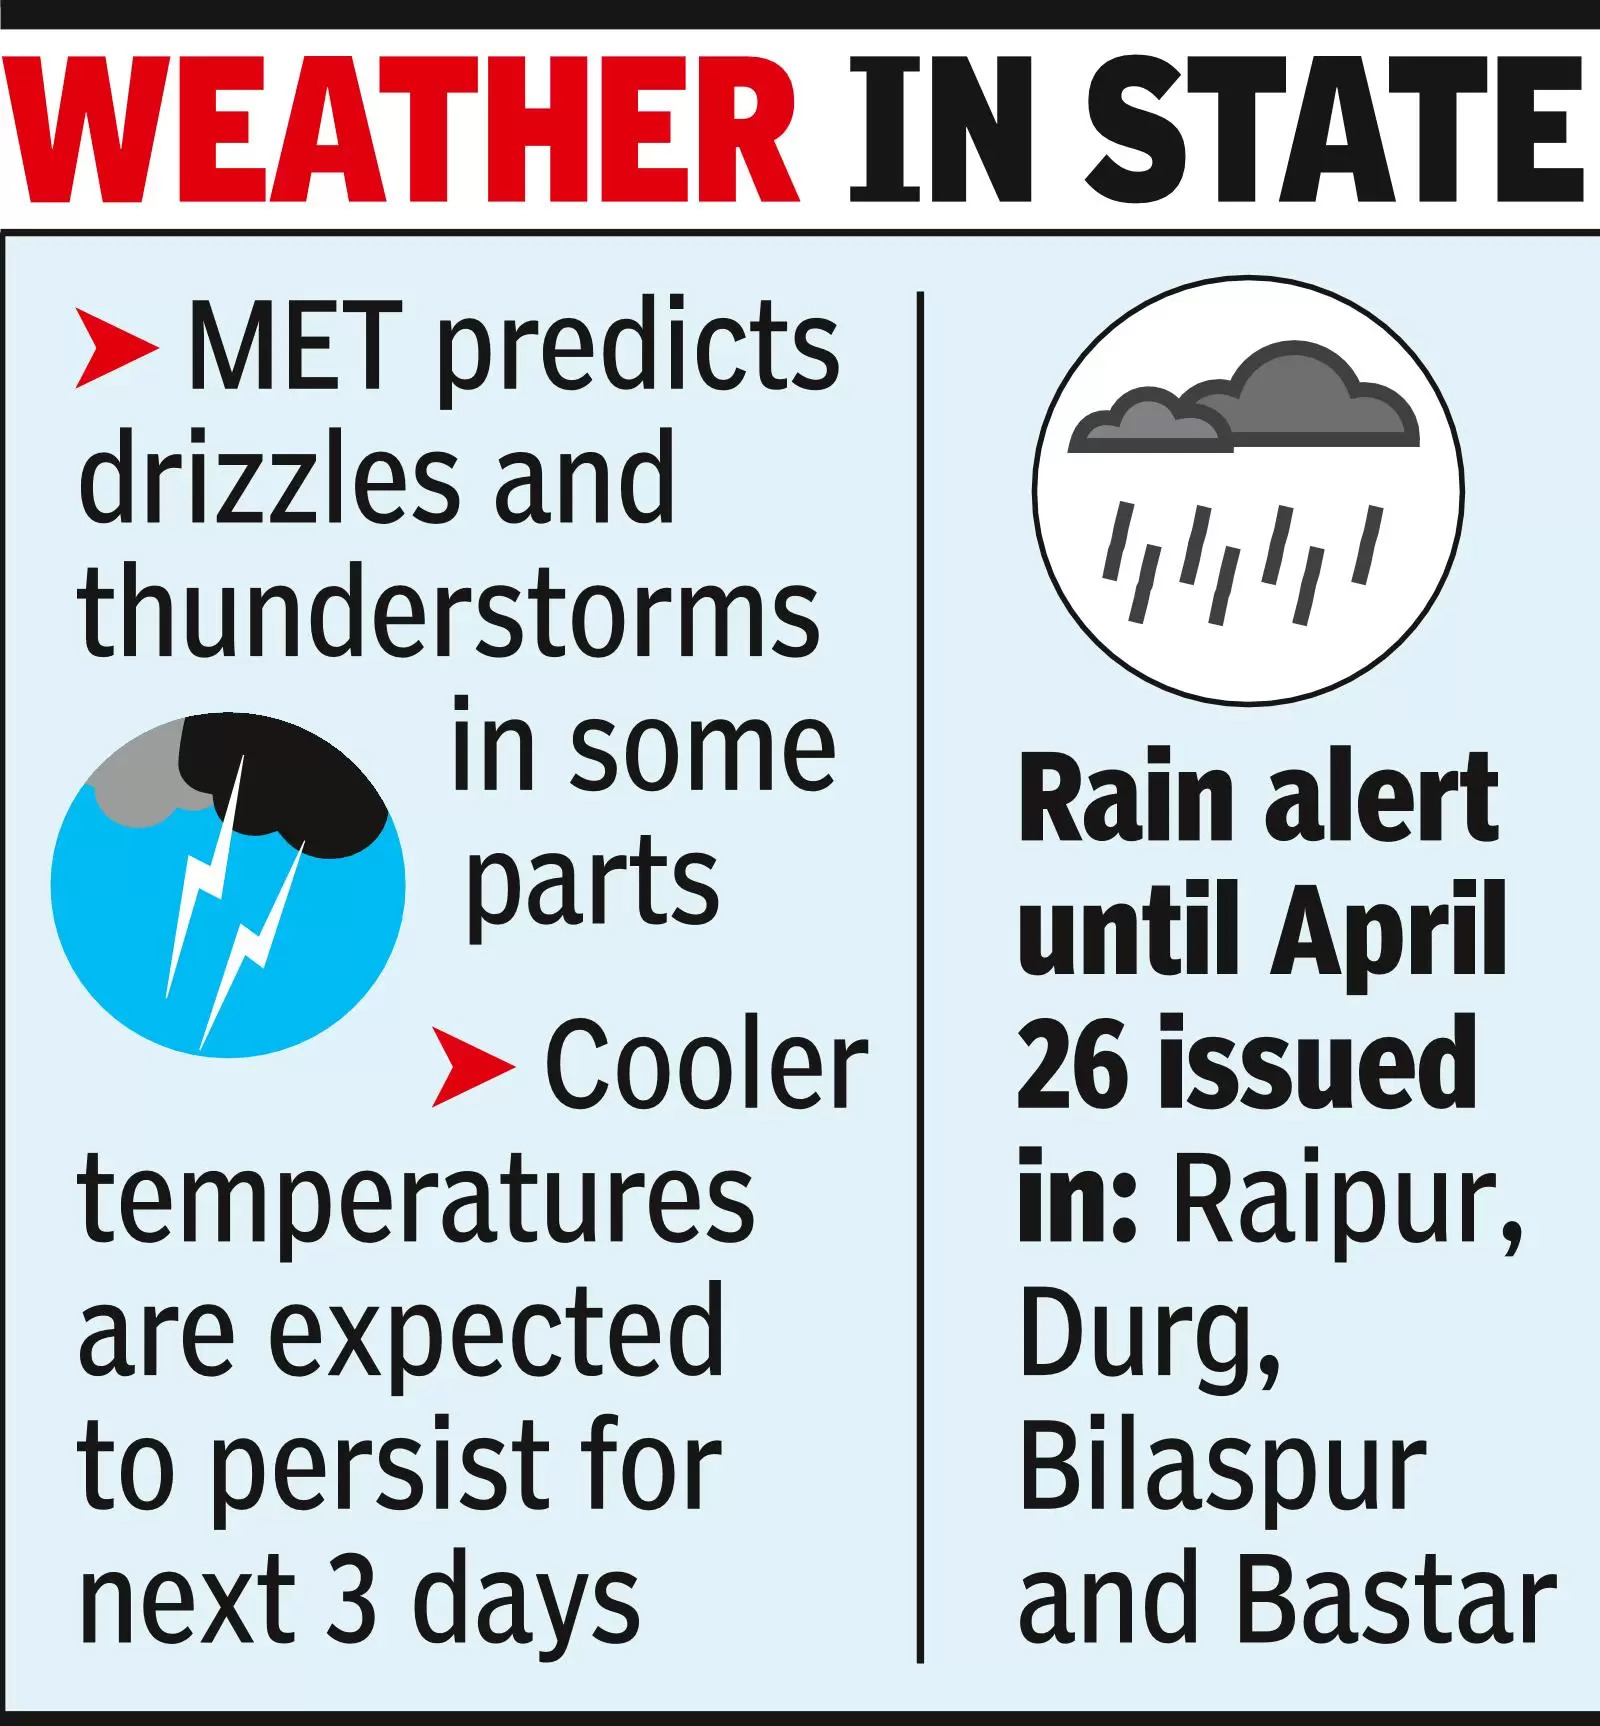 Rain alert issued in some parts of state